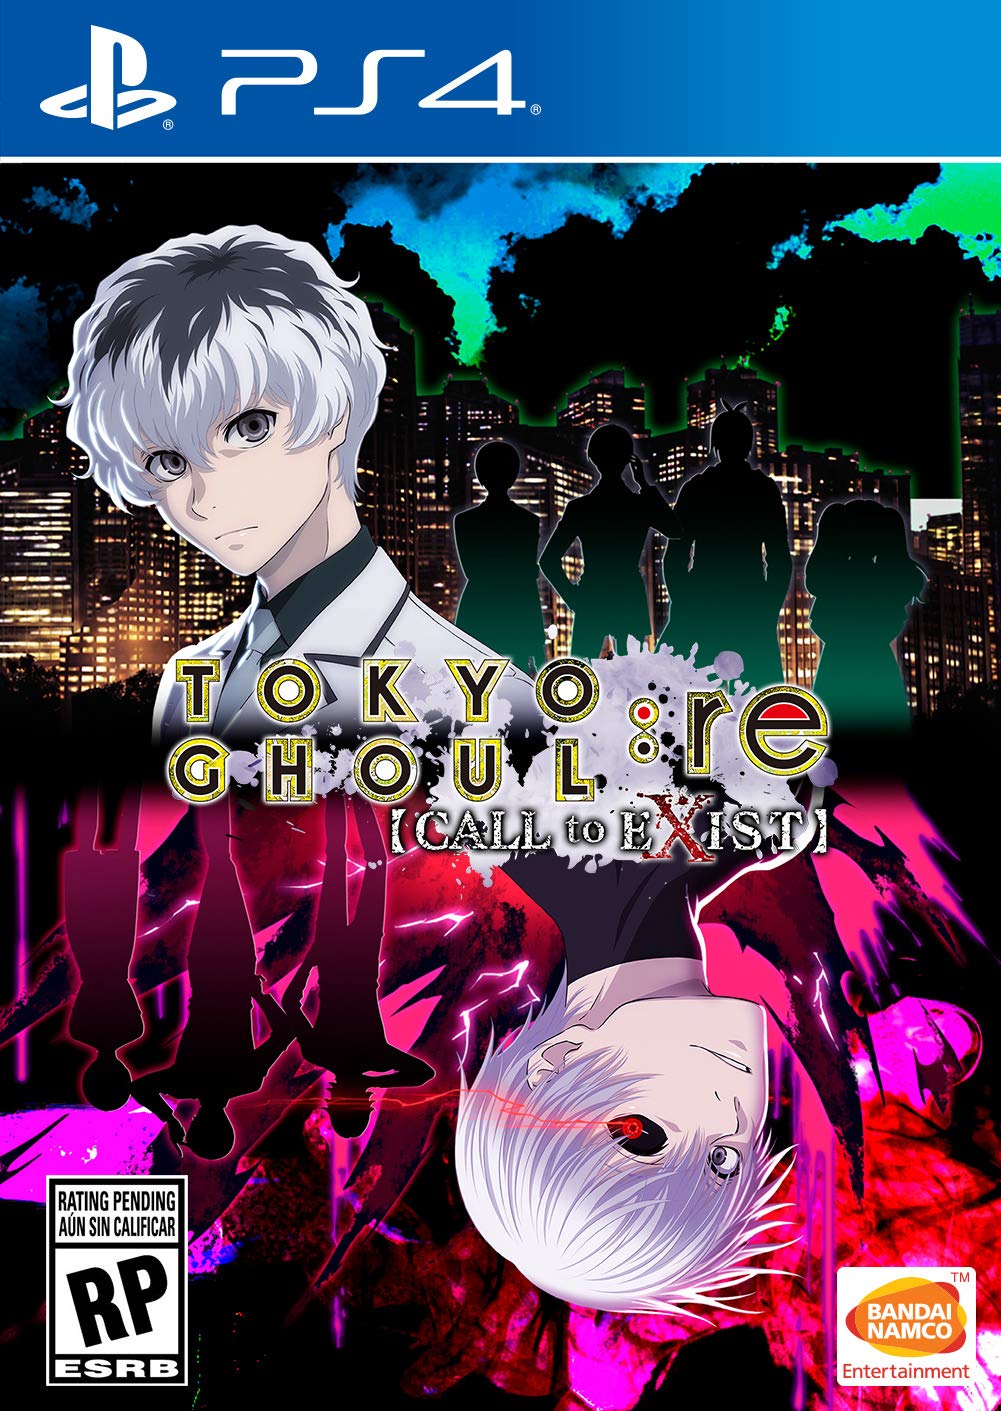 Bandai Namco Announces Online Anime Game Tokyo Ghoul:re Call to Exist